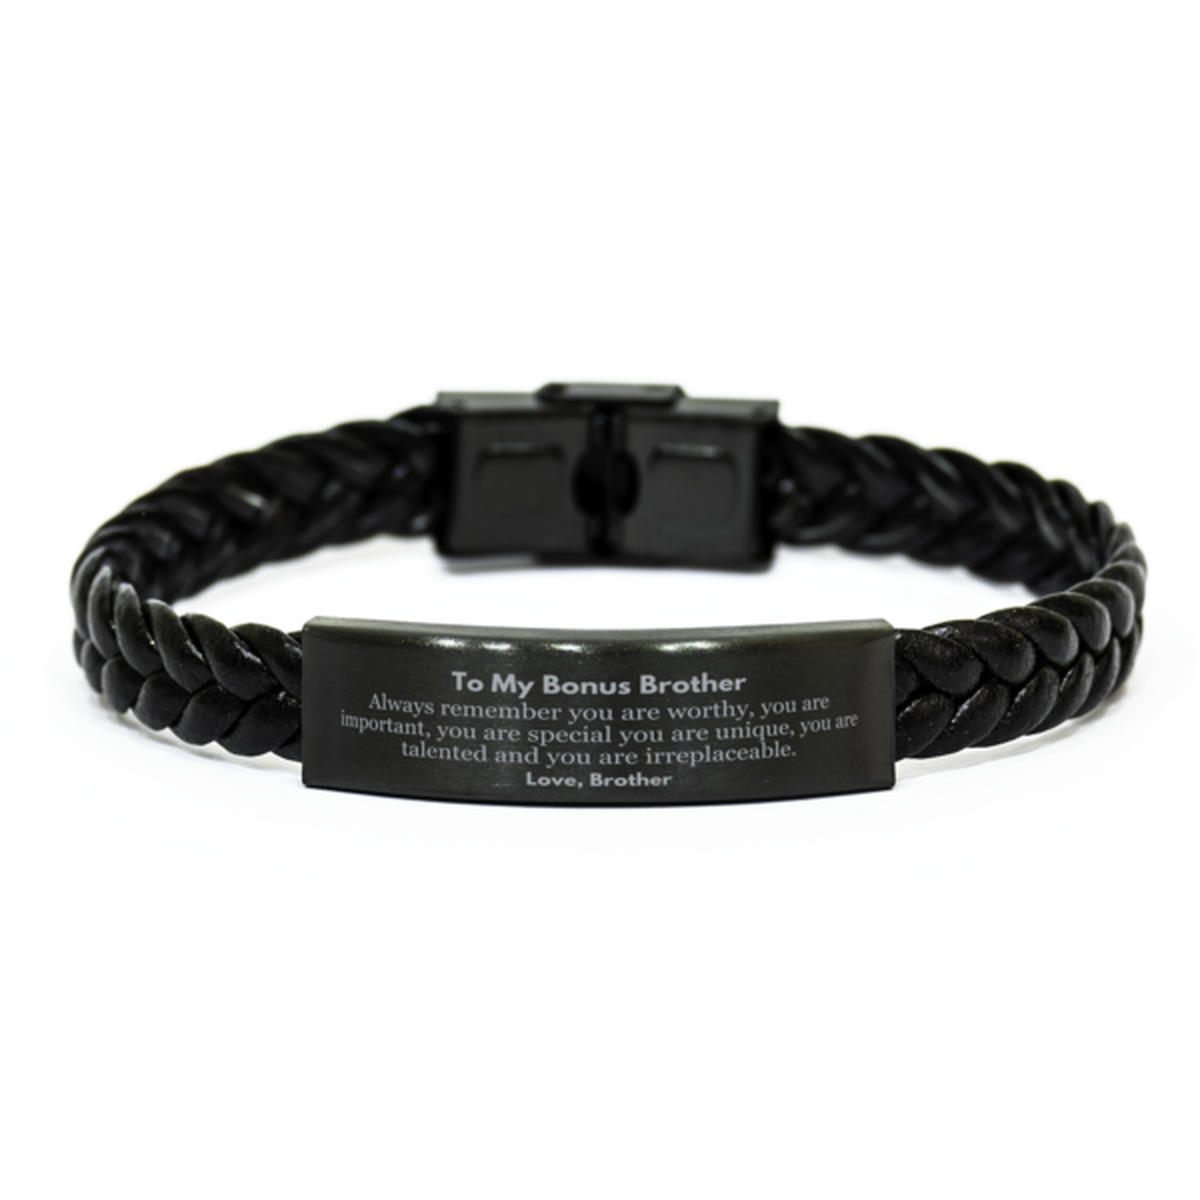 Bonus Brother Birthday Gifts from Brother, Inspirational Braided Leather Bracelet for Bonus Brother Christmas Graduation Gifts for Bonus Brother Always remember you are worthy, you are important. Love, Brother